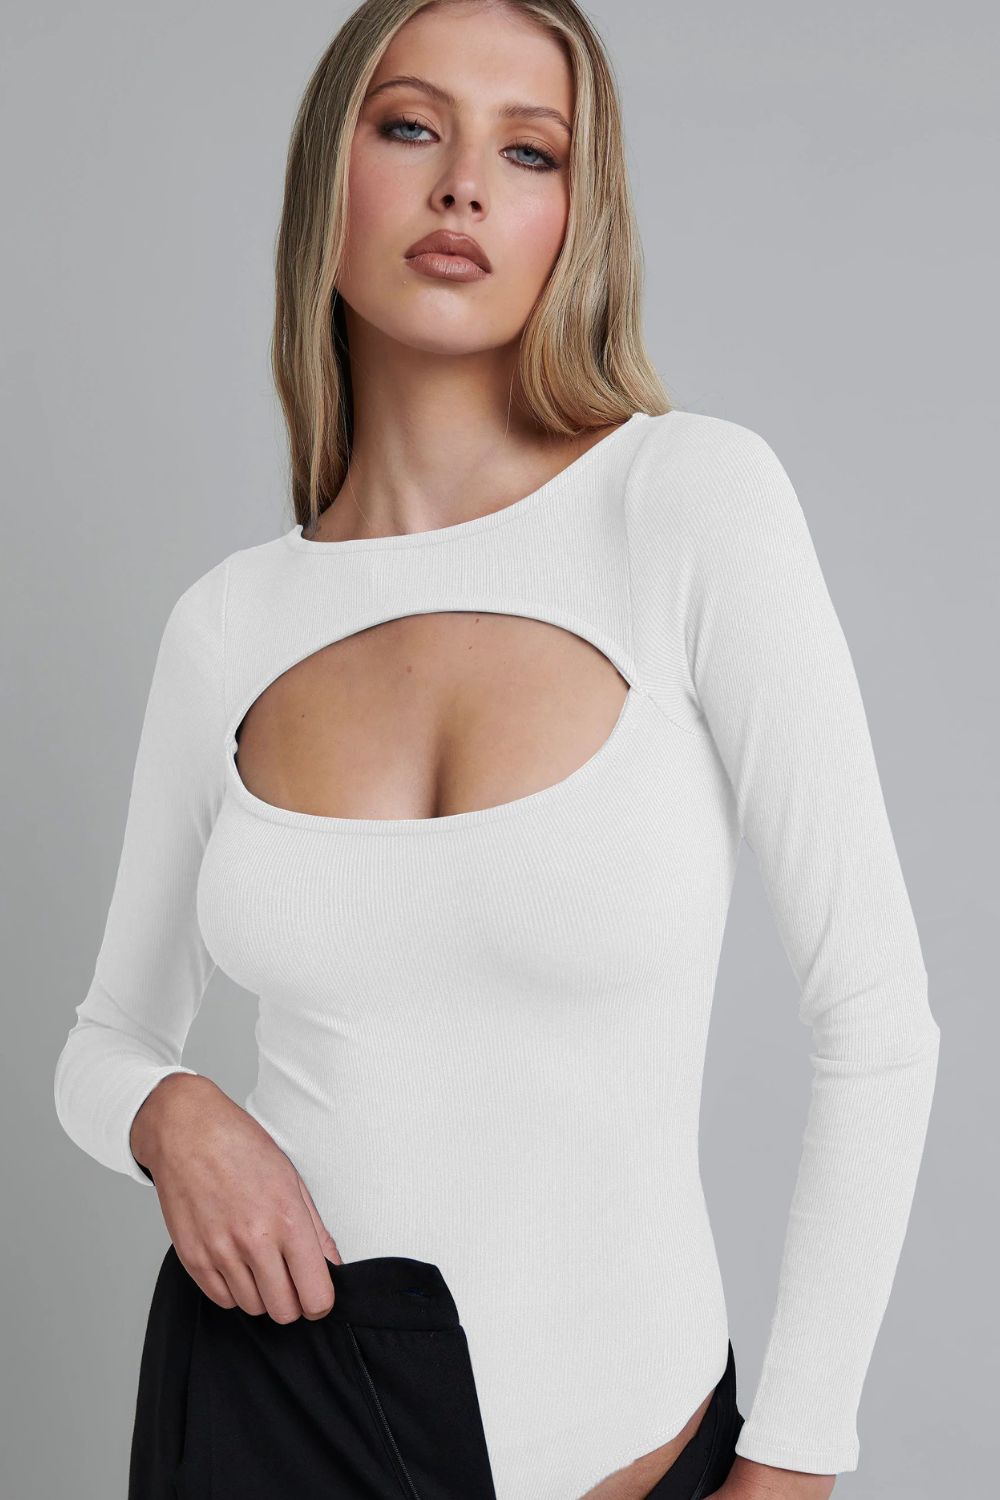 Cutout Ribbed Long Sleeve Bodysuit - White / S - Women’s Clothing & Accessories - Shirts & Tops - 1 - 2024